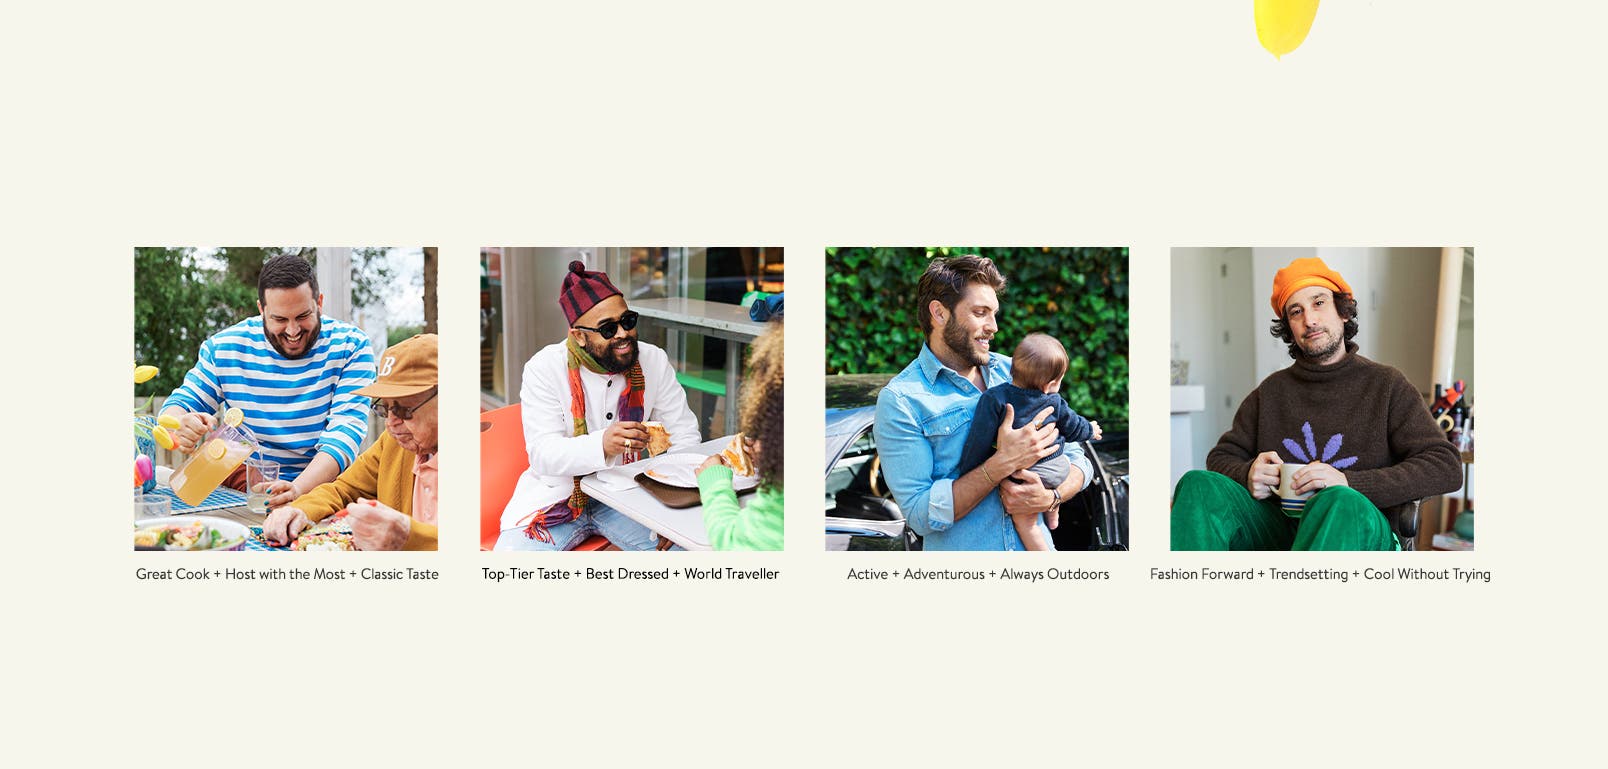 Pop-In@Nordstrom: gifts for dads, grandpas, friends, you, me, everyone.